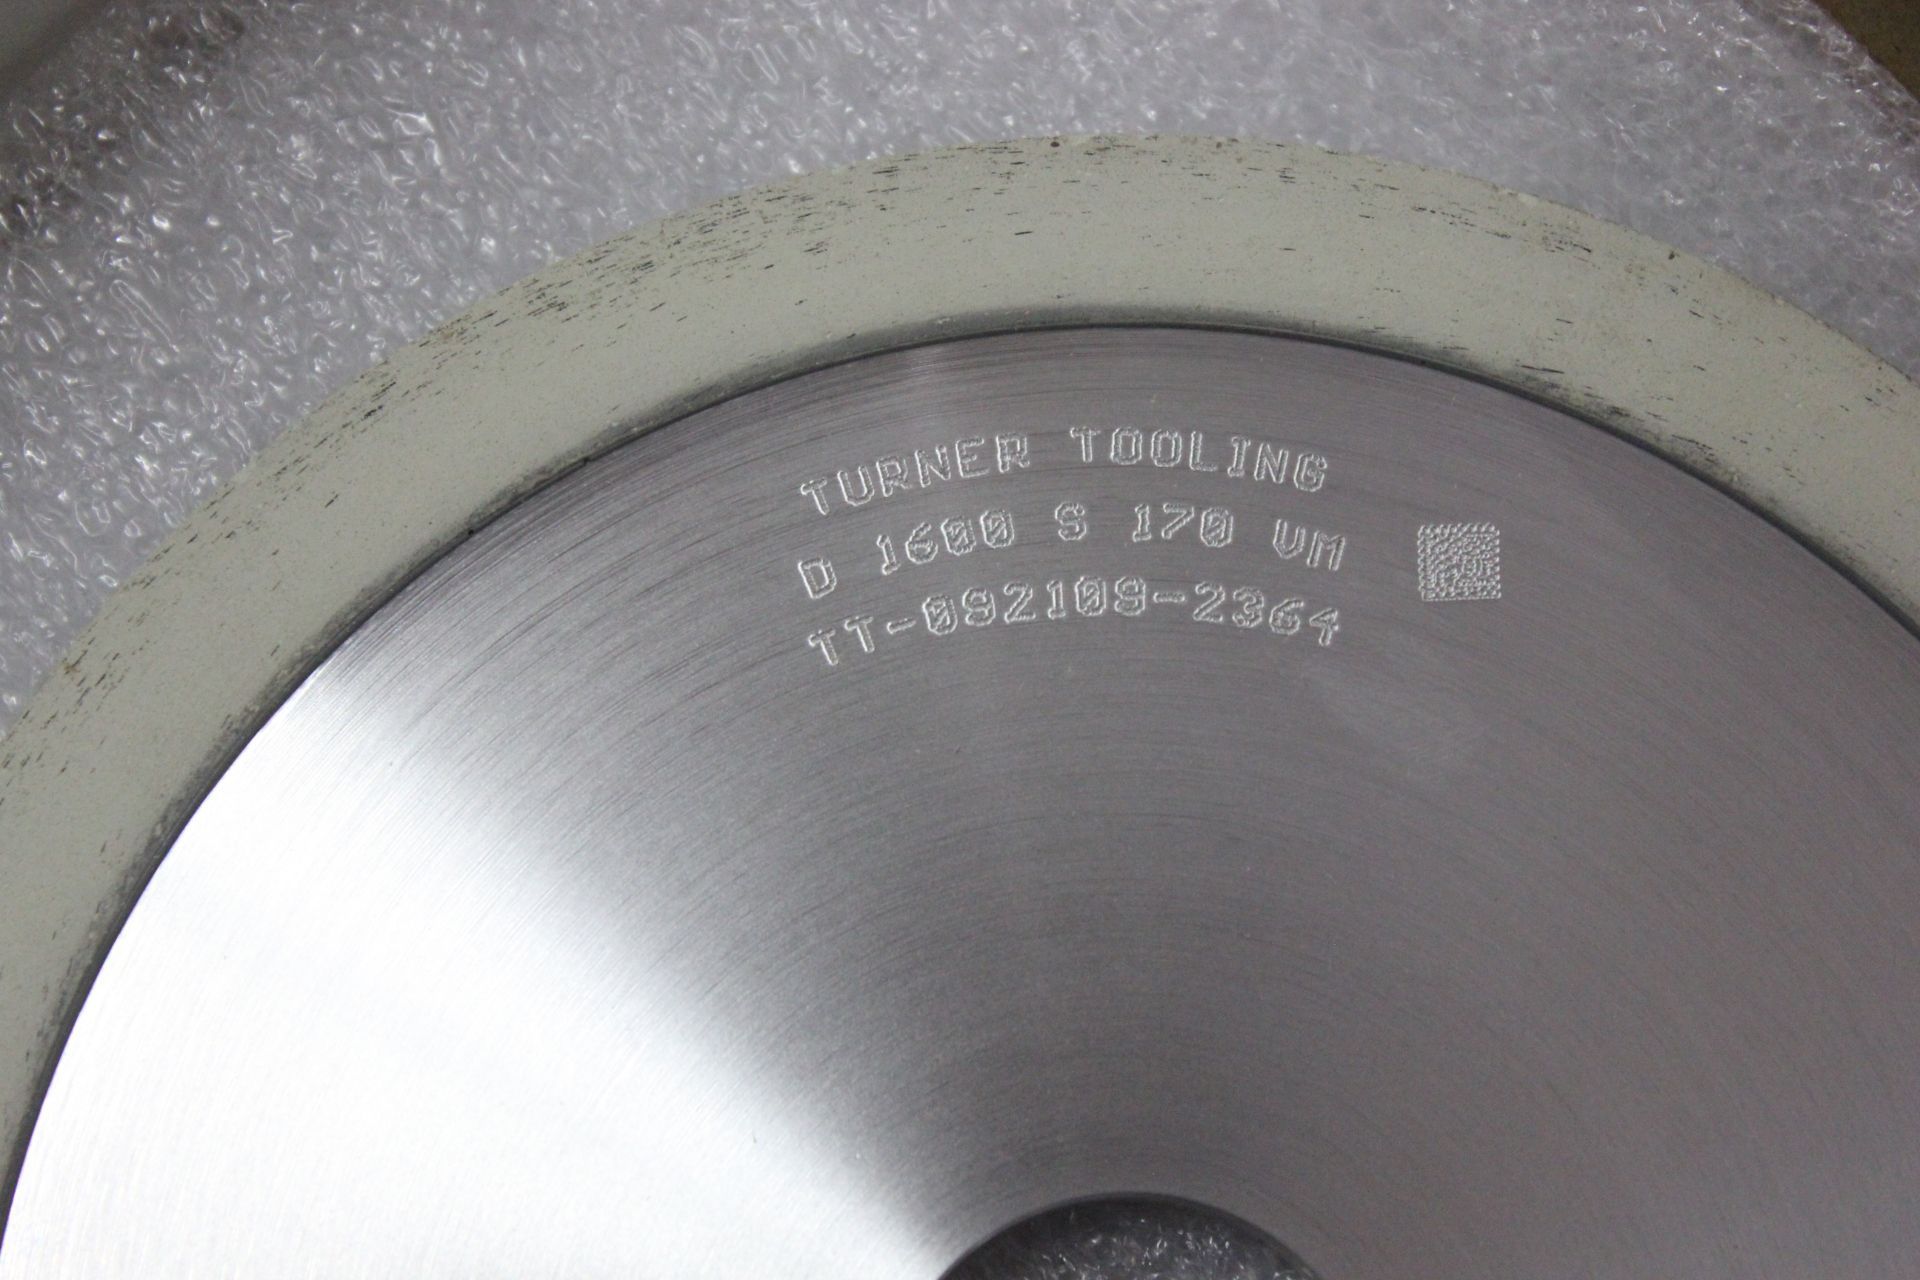 LOT OF 5 NEW TURNER TOOLING VITRIFIED DIAMOND 1A1 GRINDING WHEELS - Image 6 of 7